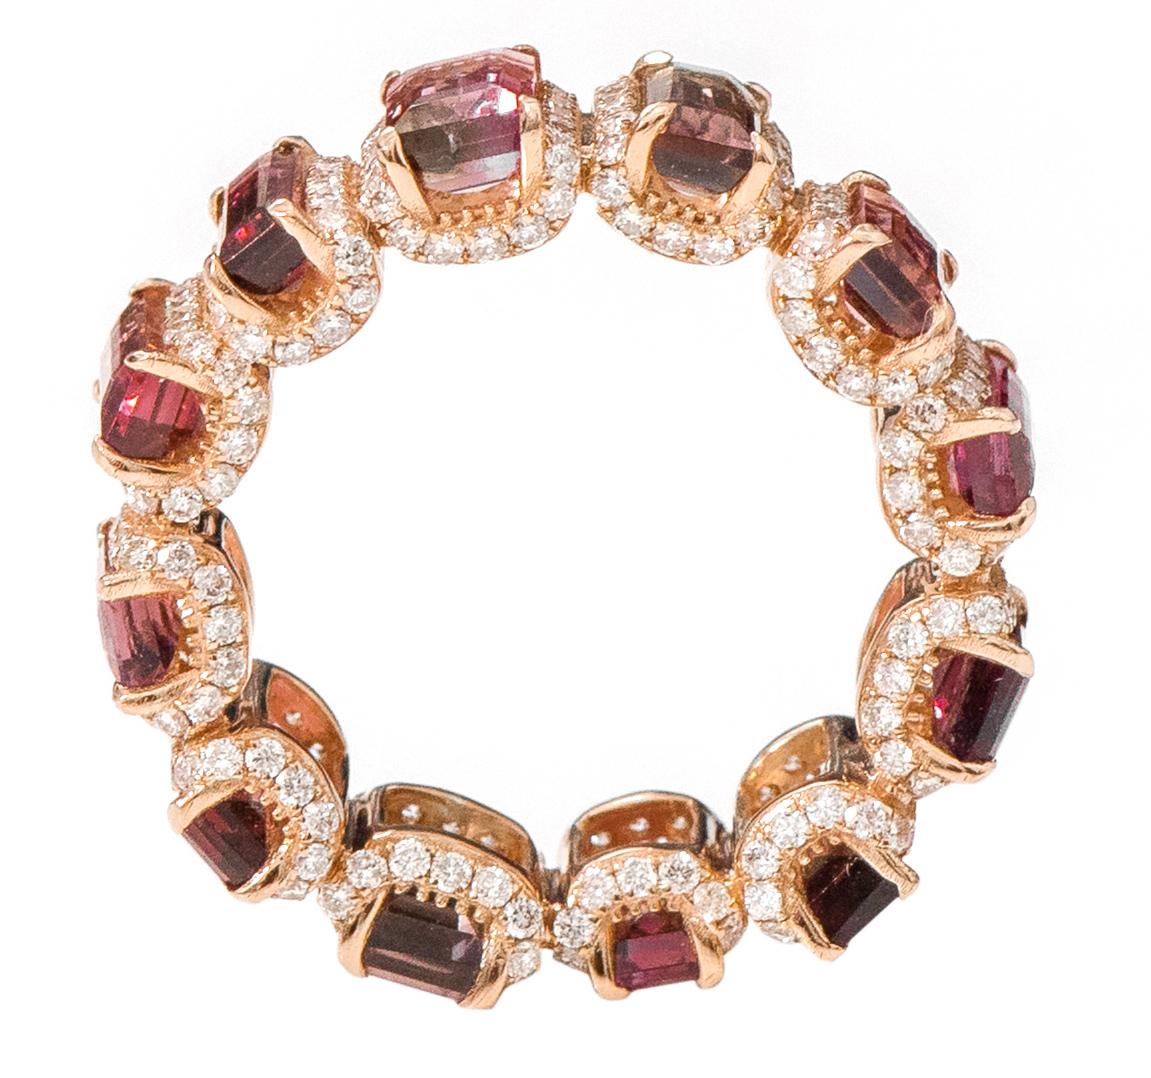 Contemporary 18 Karat Rose Gold 7.79 Carat Tourmaline and Diamond Eternity Band Ring For Sale